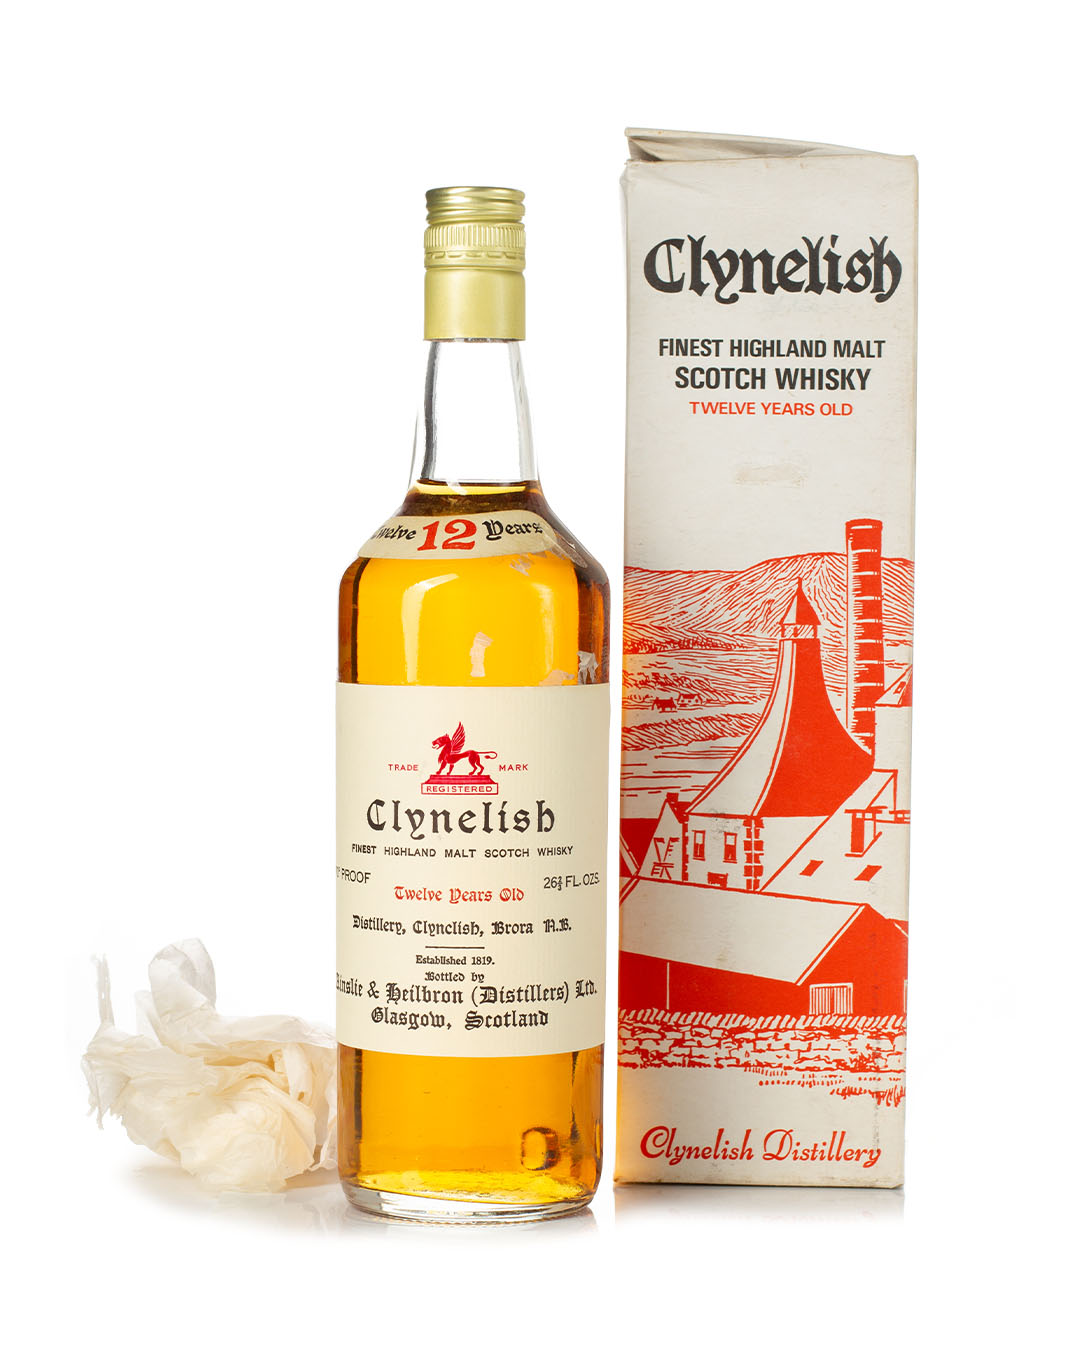 Just how good is this bottle of Clynelish? Stay tuned to find out.